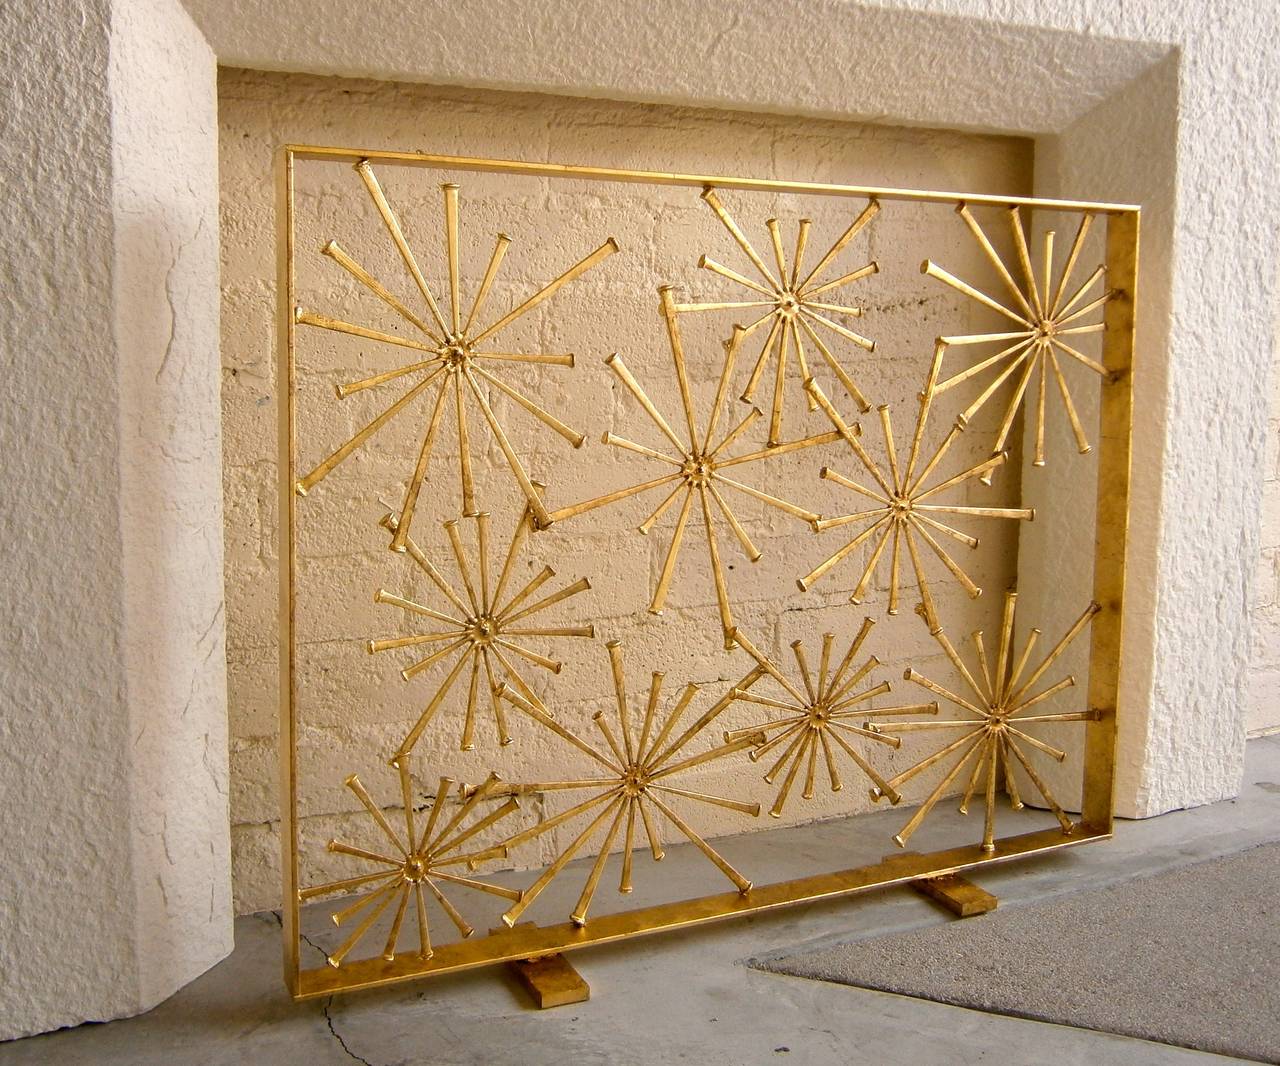 A gilded steel asymmetrically designed starburst fire screen by American artist Del Williams.  The screen was custom crafted in Mr. Williams' Southern California studio using steel pieces that have been hand-welded and hand-gilded.  This screen is